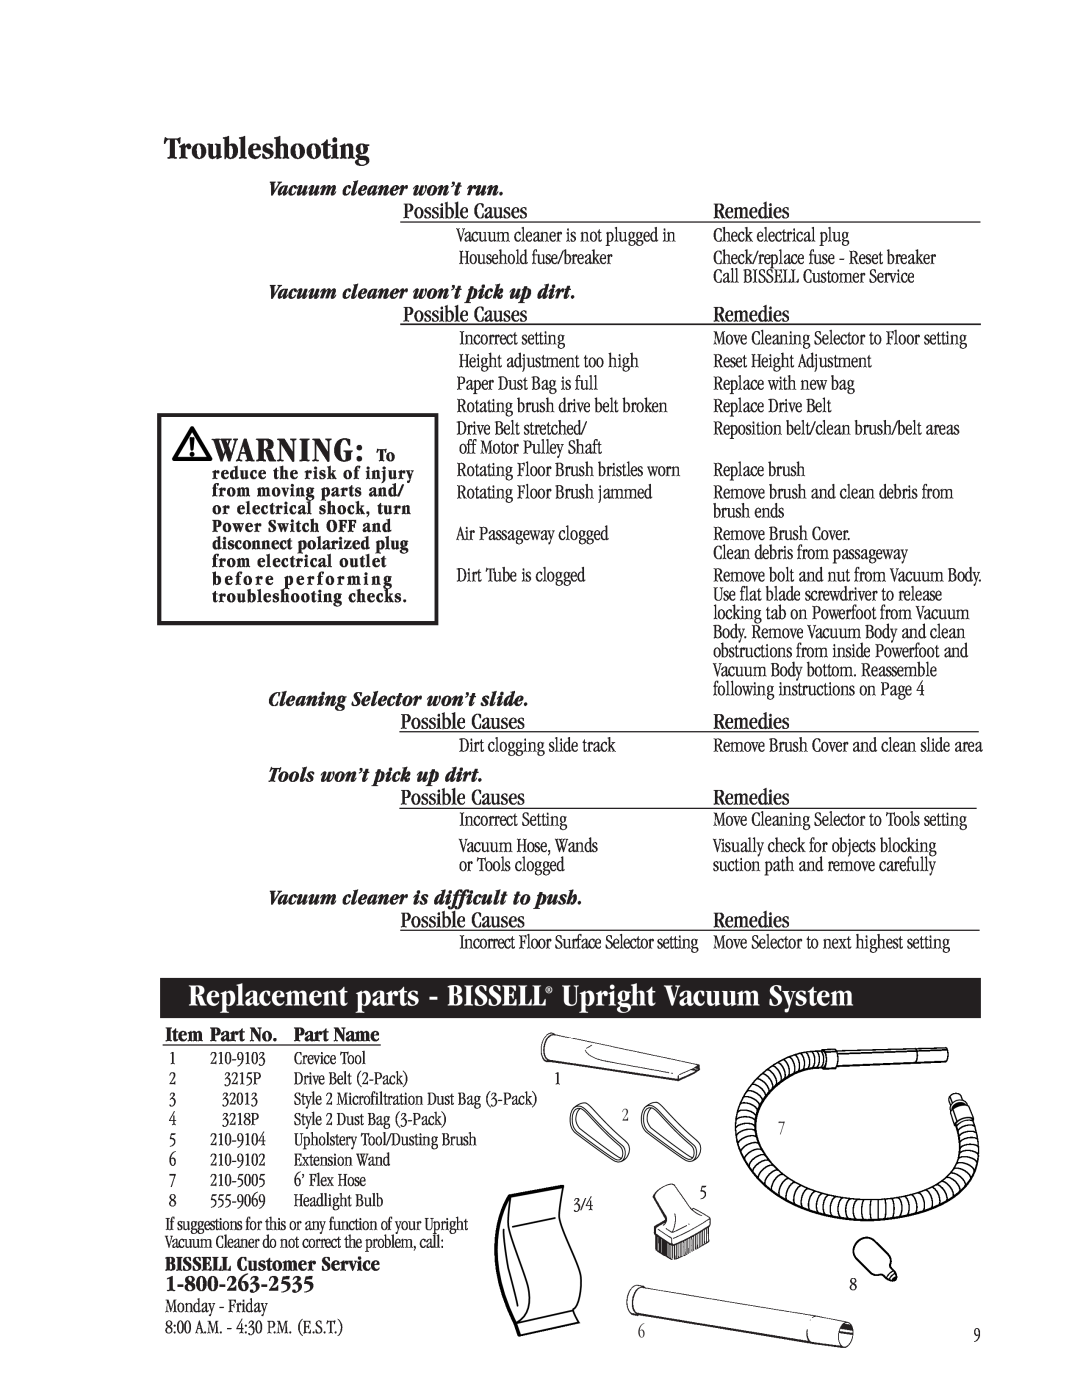 Bissell 3512-5 Troubleshooting, Replacement parts - BISSELL Upright Vacuum System, Possible Causes, Remedies, Item Part No 